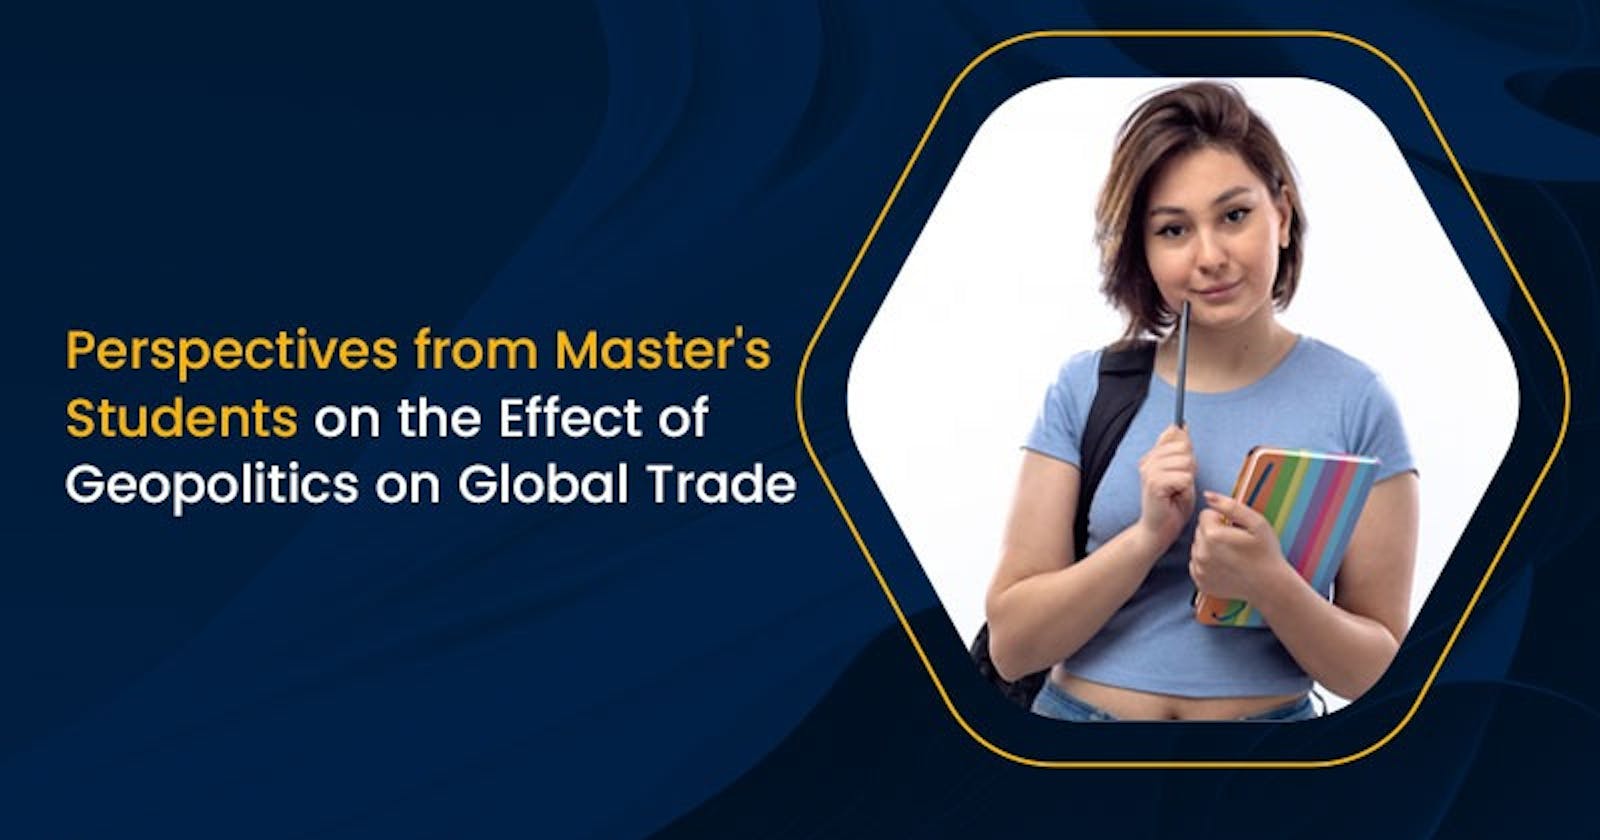 Perspectives from Master's Students on the Effect of Geopolitics on Global Trade